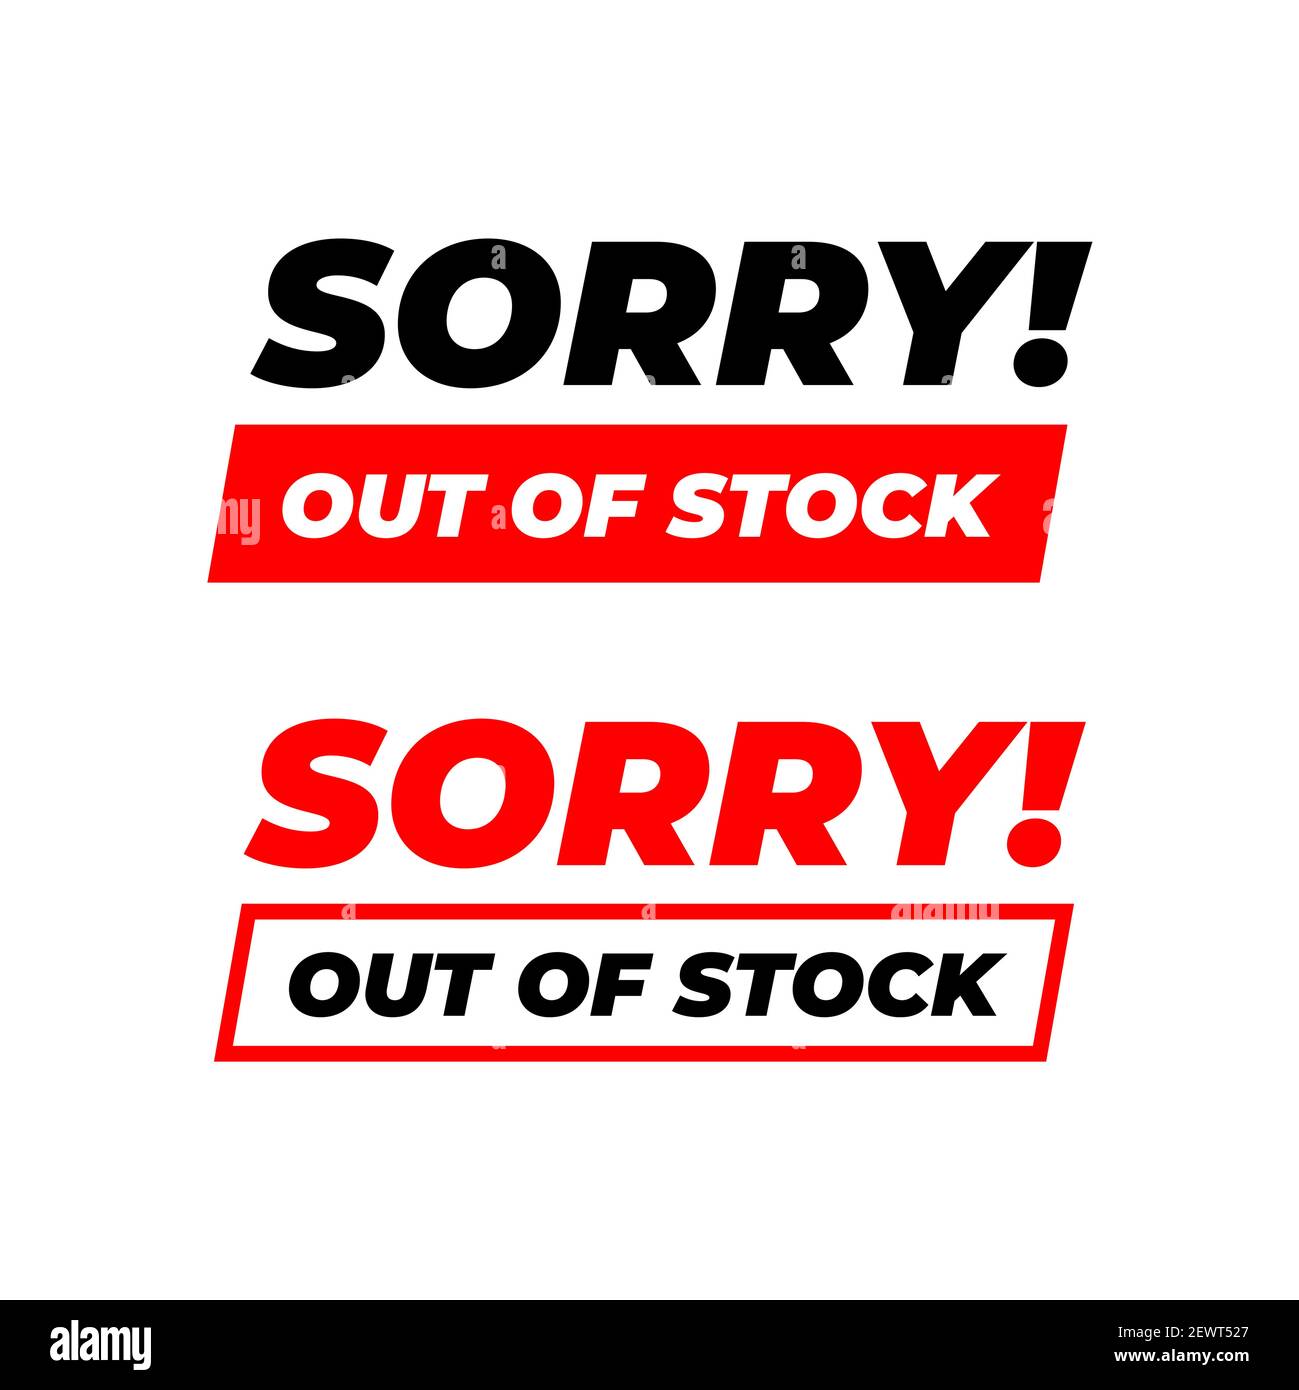 Sorry out of stock sign. Stock Vector